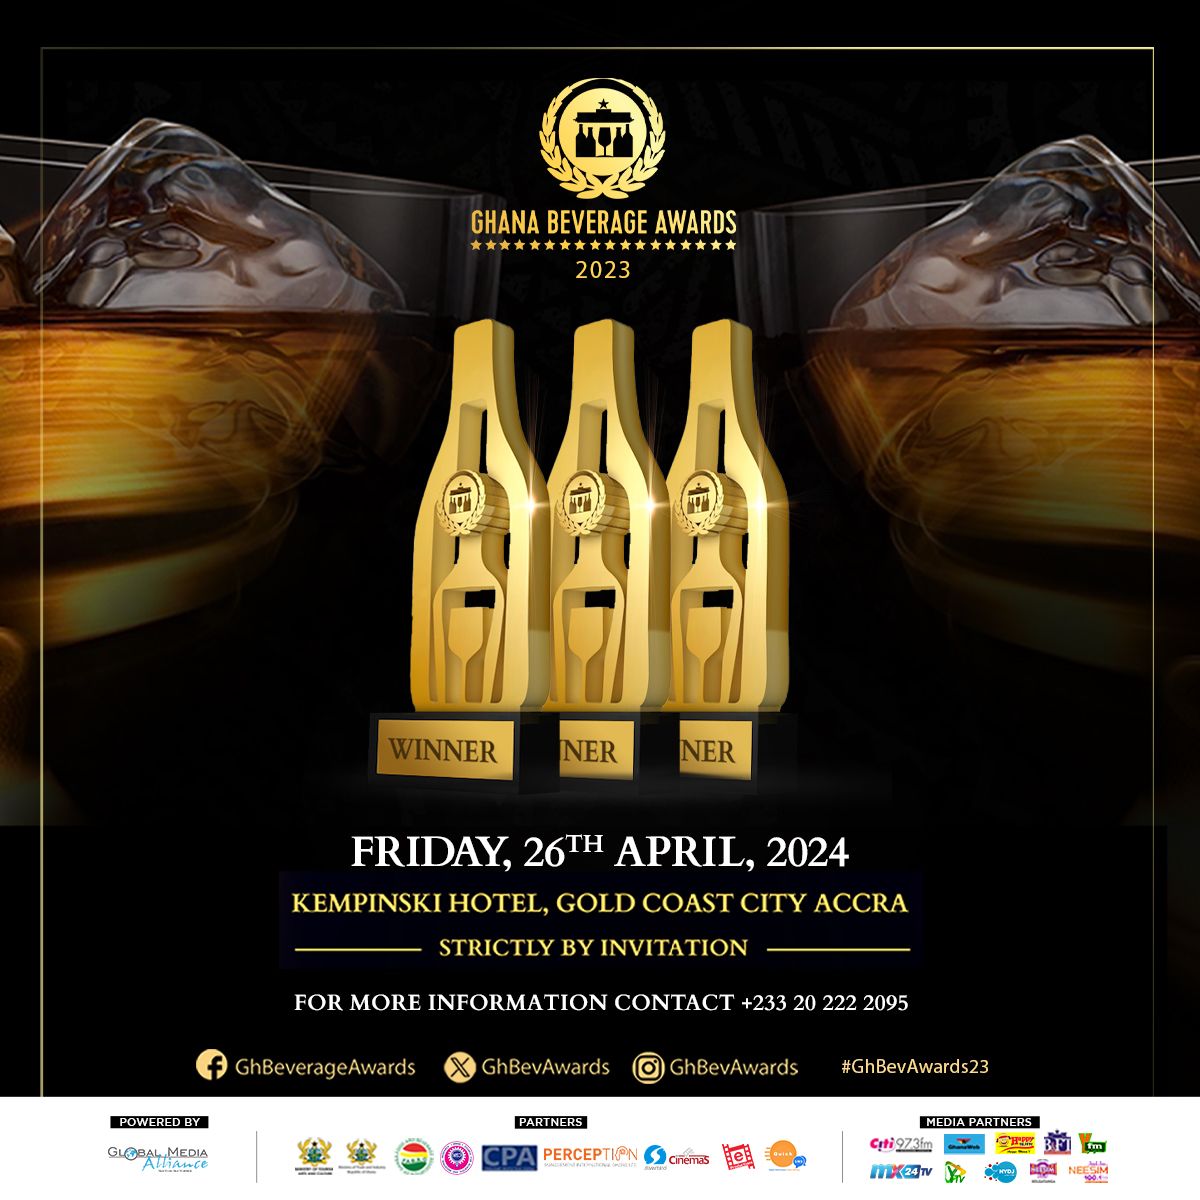 We are anticipating another edition of the #GhBevAwards23 tonight at Kempinski Hotel. 🔥🔥😍